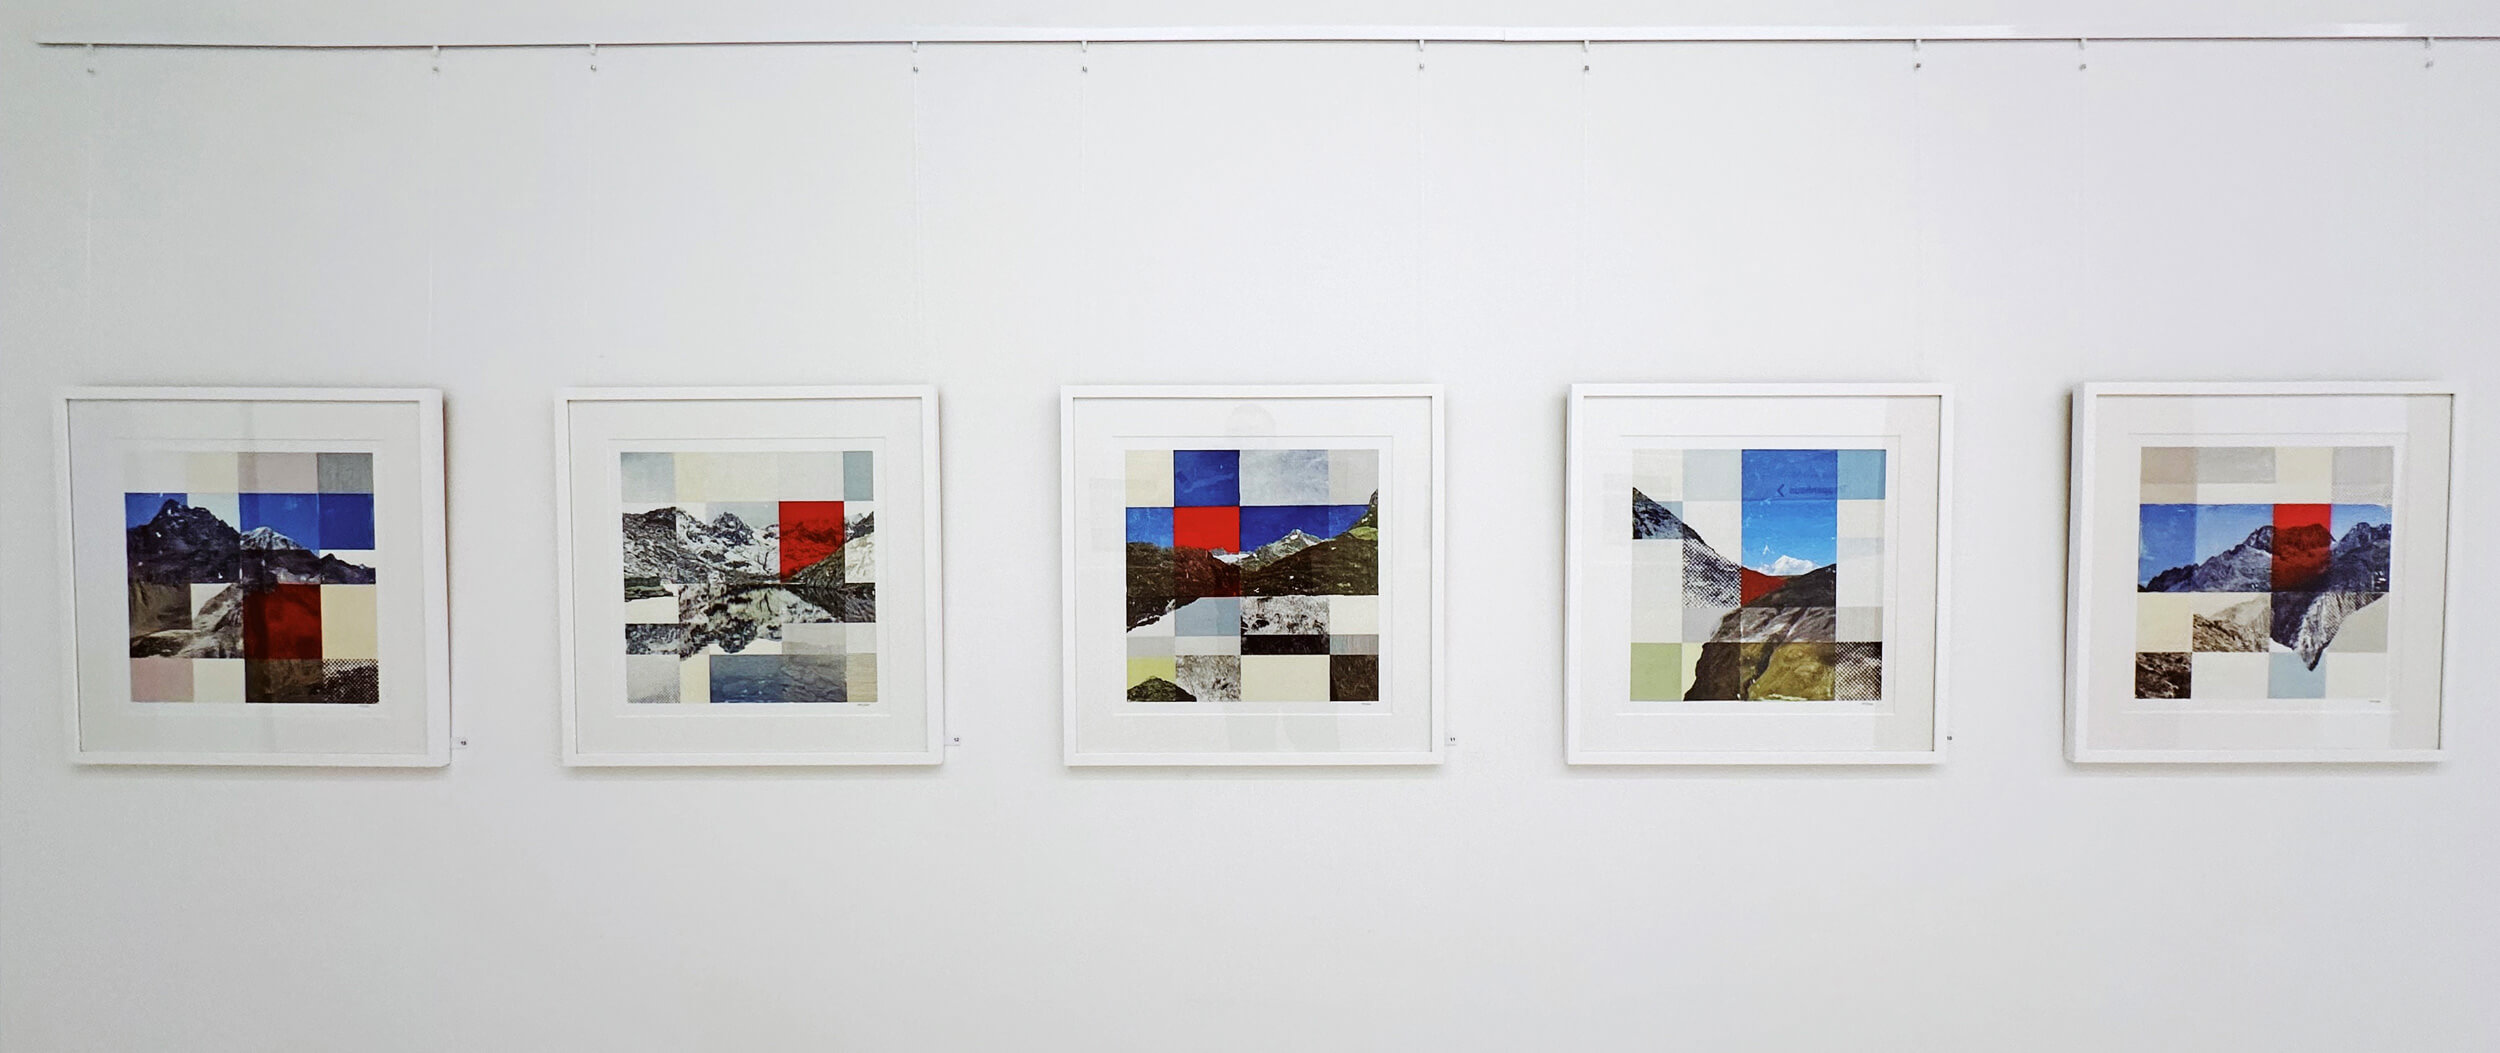 Matthias Maier | Stories | Week 21 | Hung paintings on my exhibition in Laufen